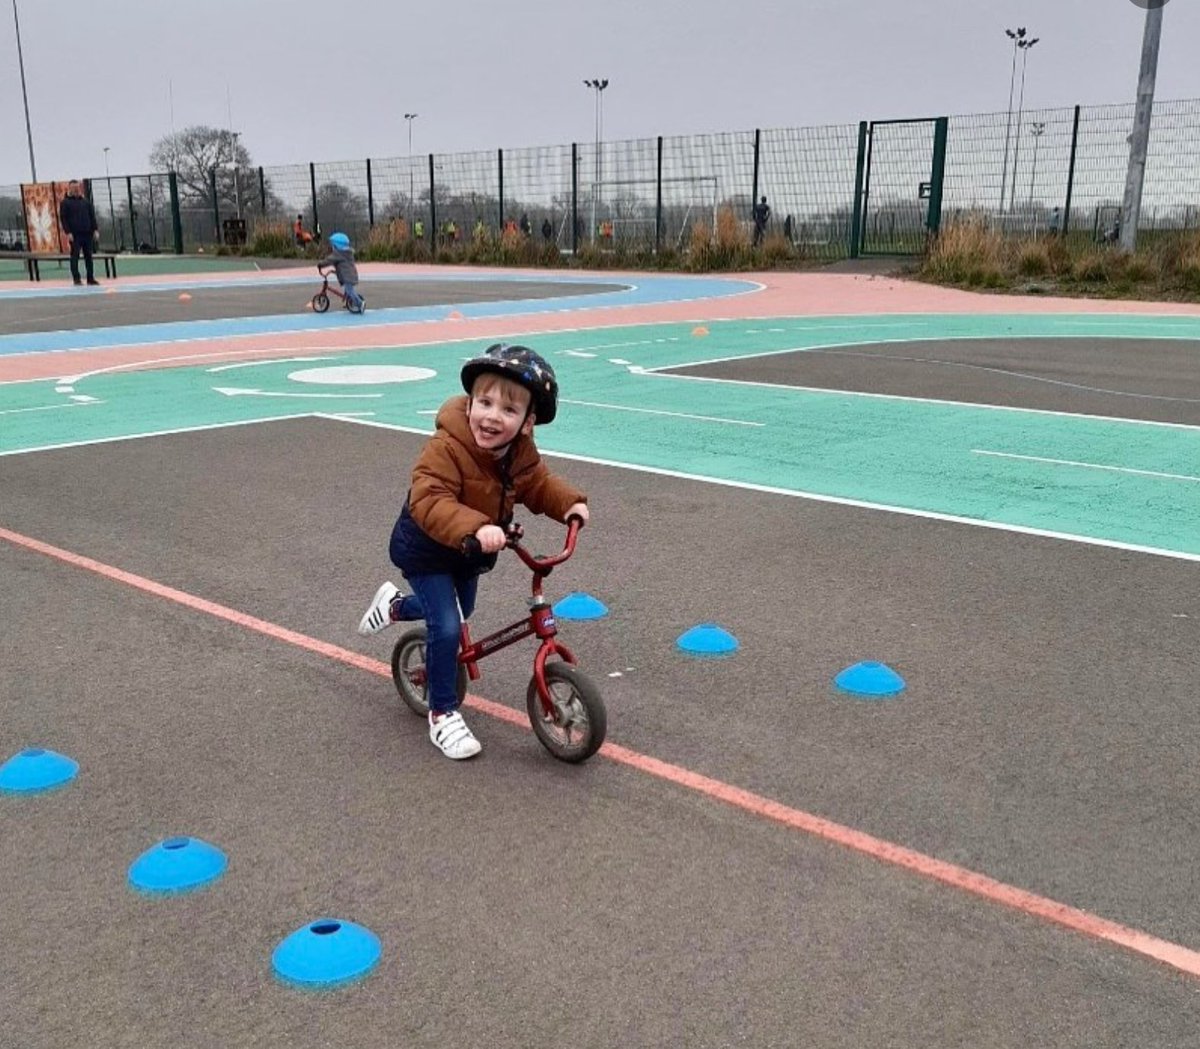 Get the littles ones on their bikes 🚴 with British Cycling Sessions - this October Half Term! With sessions for everyone including no cycle experience! Find out more ⏩ colchestersportspark.co.uk/go-ride-cyclin…